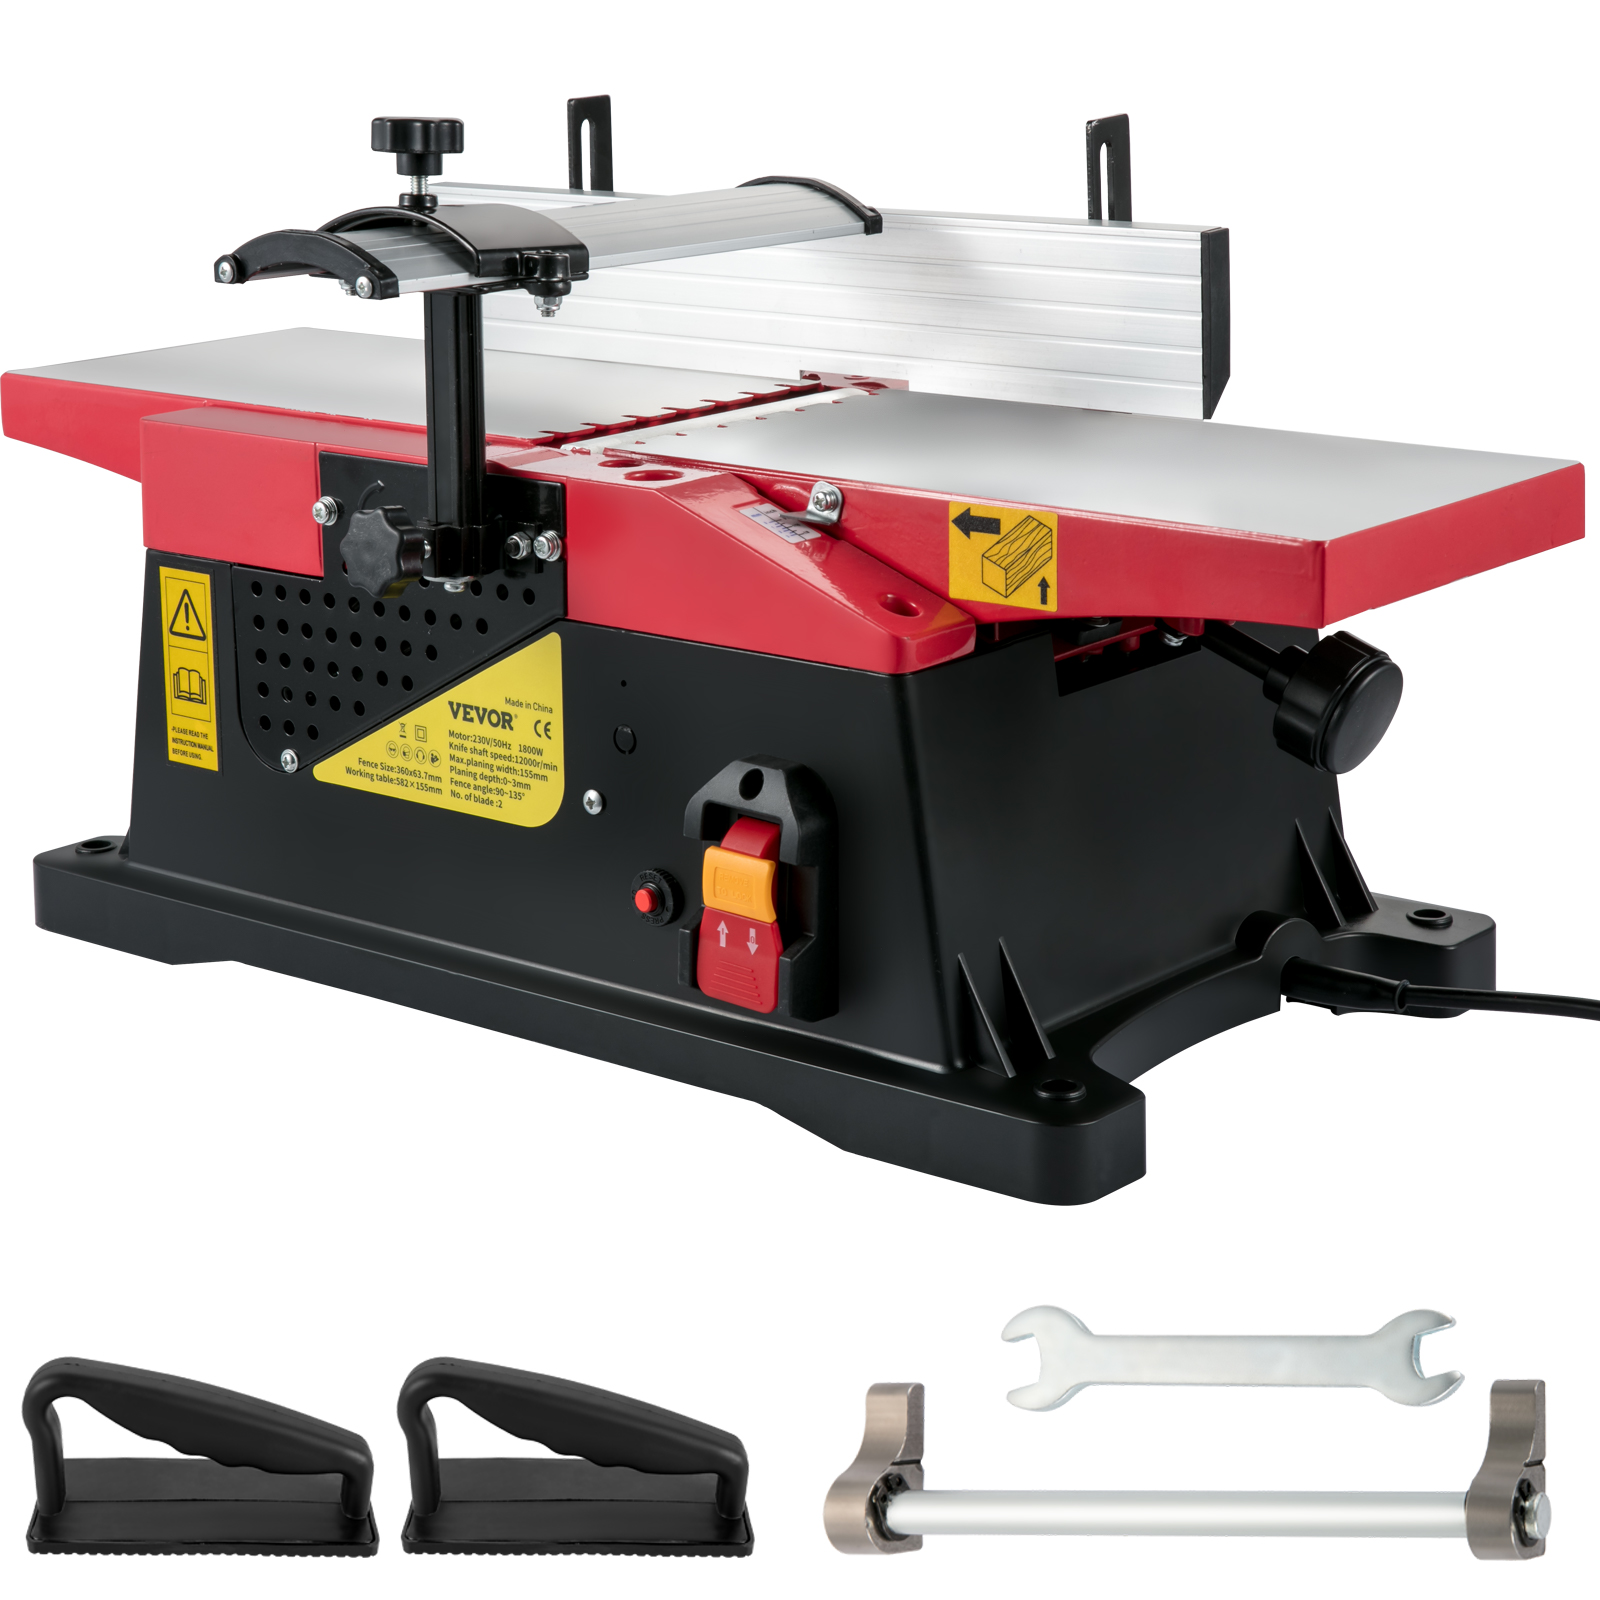 VEVOR Planer Stand 100 lbs / 45 kg Heavy Loads Three-gear Height Adjustable Thickness Planer Table,with 4 Stable Casters & Storage Space for Most